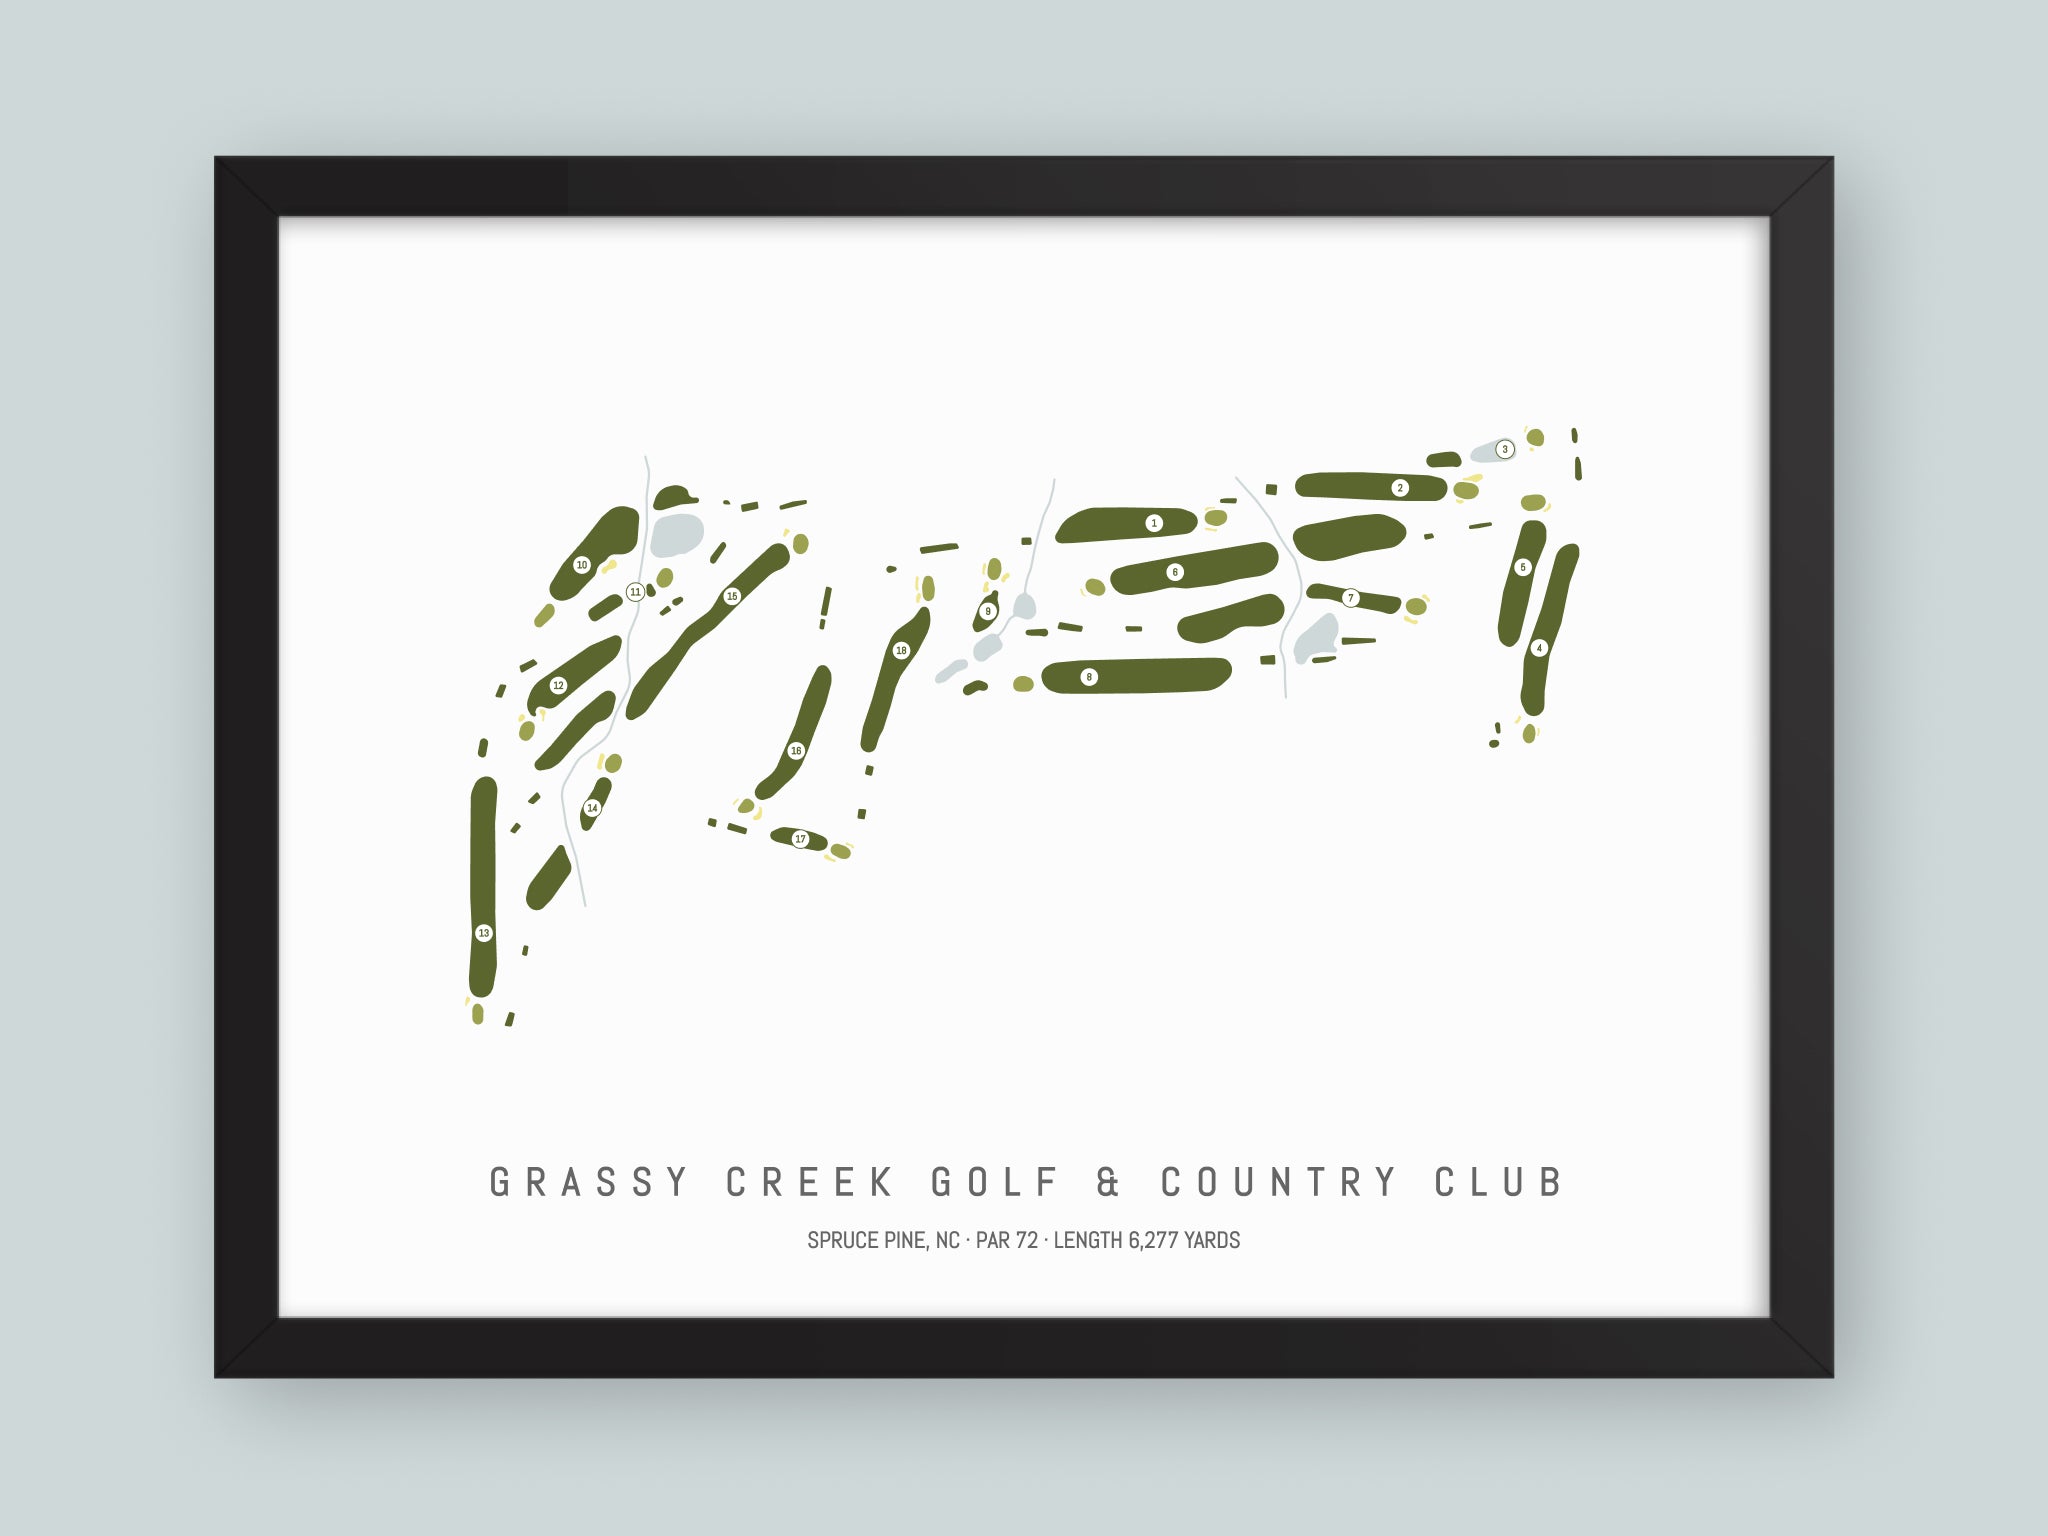 Grassy-Creek-Golf-And-Country-Club-NC--Black-Frame-24x18-With-Hole-Numbers